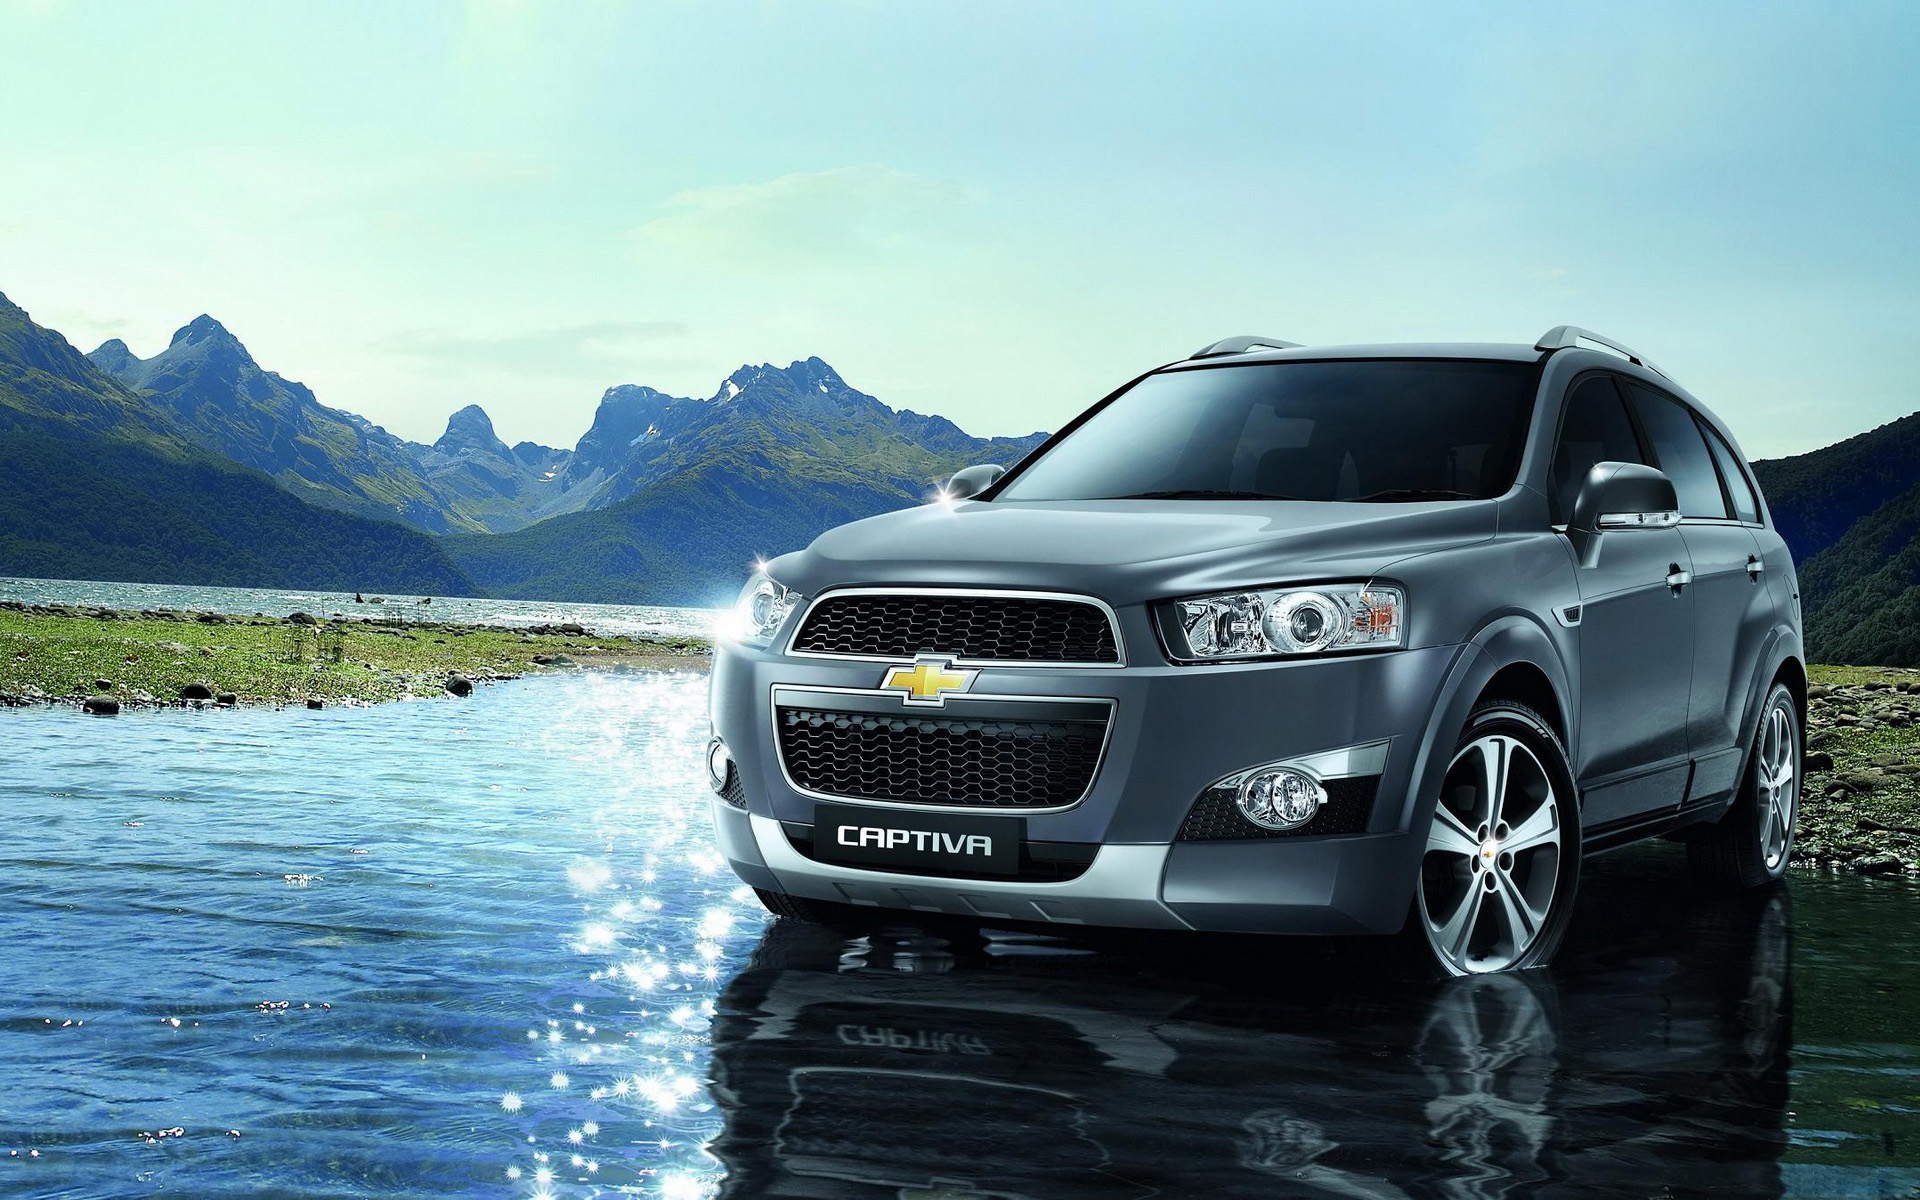 Chevrolet Captiva wallpapers and images - wallpapers, pictures, photos